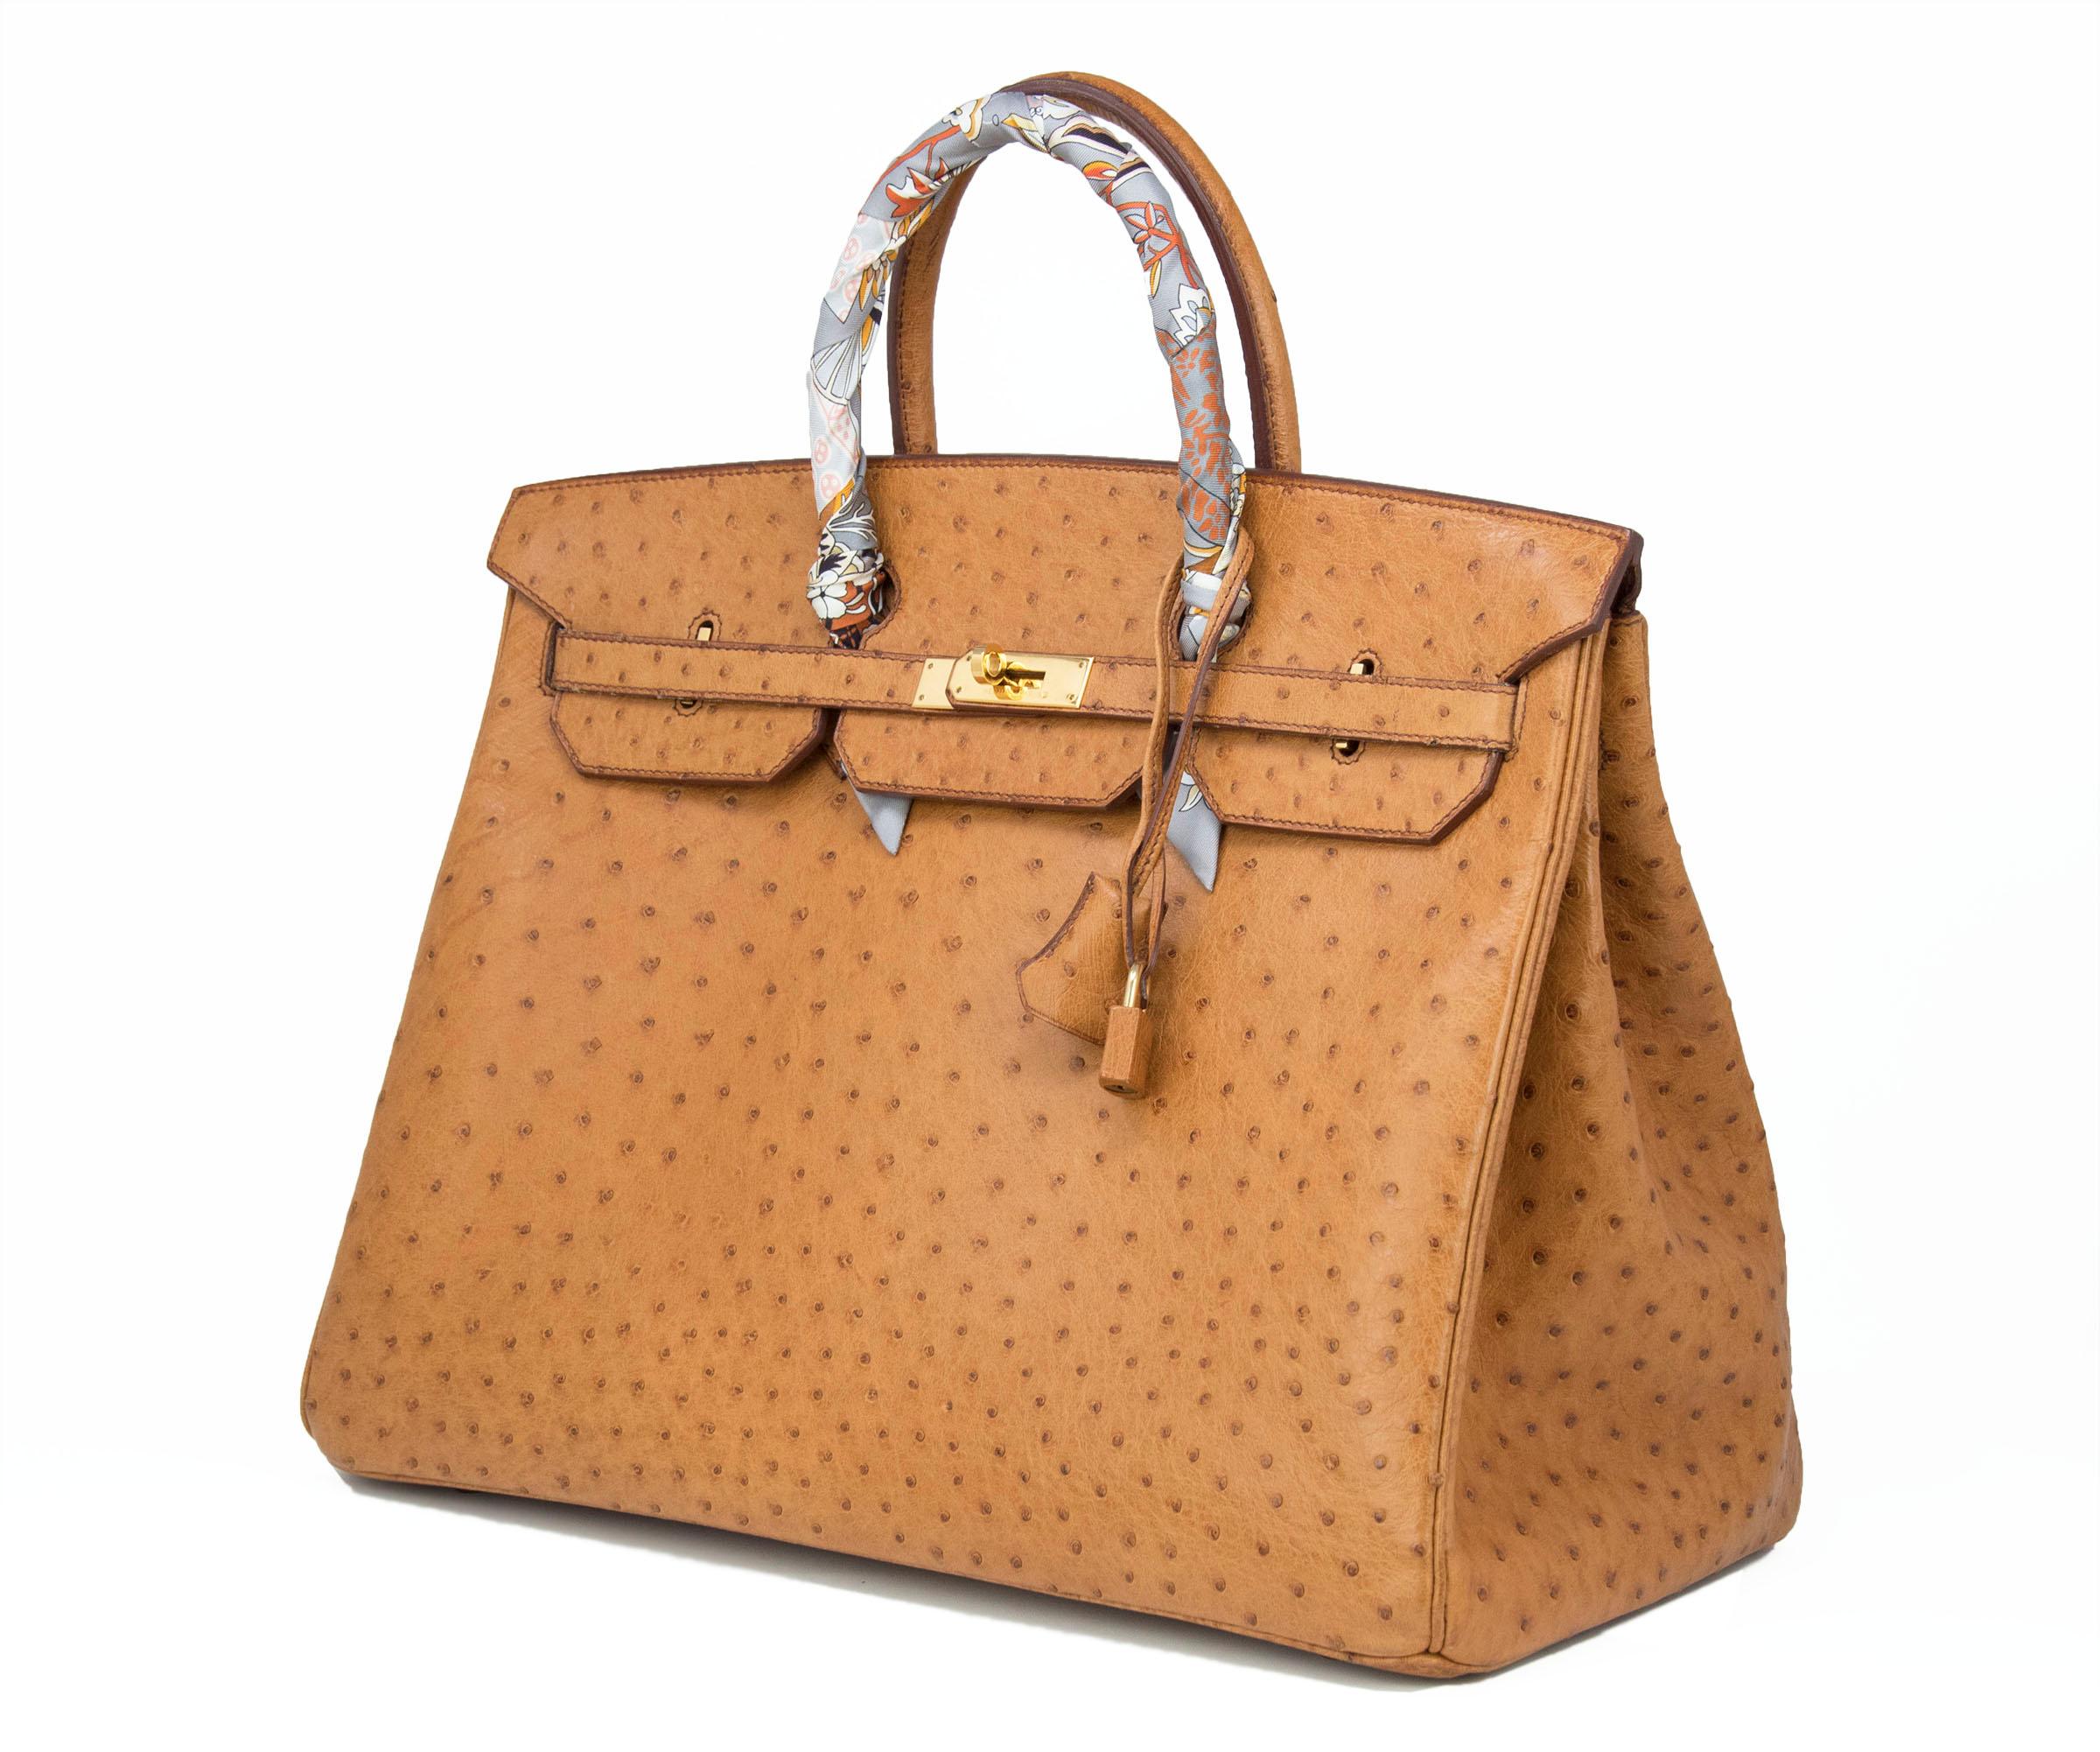 Incredibly rare ostrich birkin bag, Hermes has stopped making them in this coveted skin.  A large 40cm in a stunning light brown that goes with any outfit and has plenty of room for all your belongings.  A true classic and collectors item.

Size: